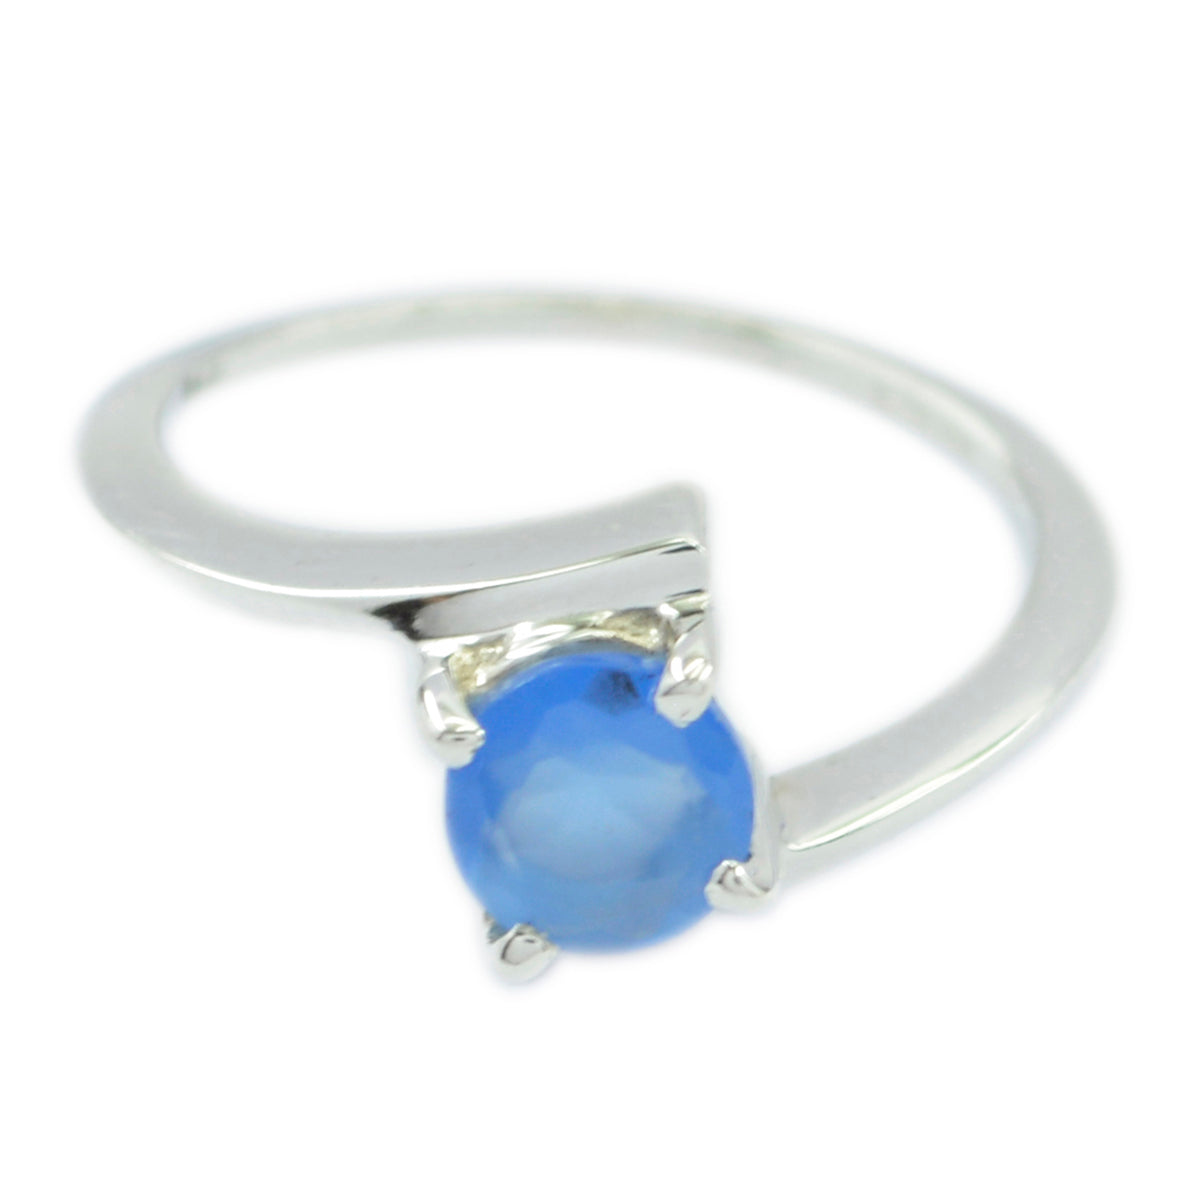 Riyo Statuesque Gems Chalcedony 925 Silver Ring Peoples Jewelry